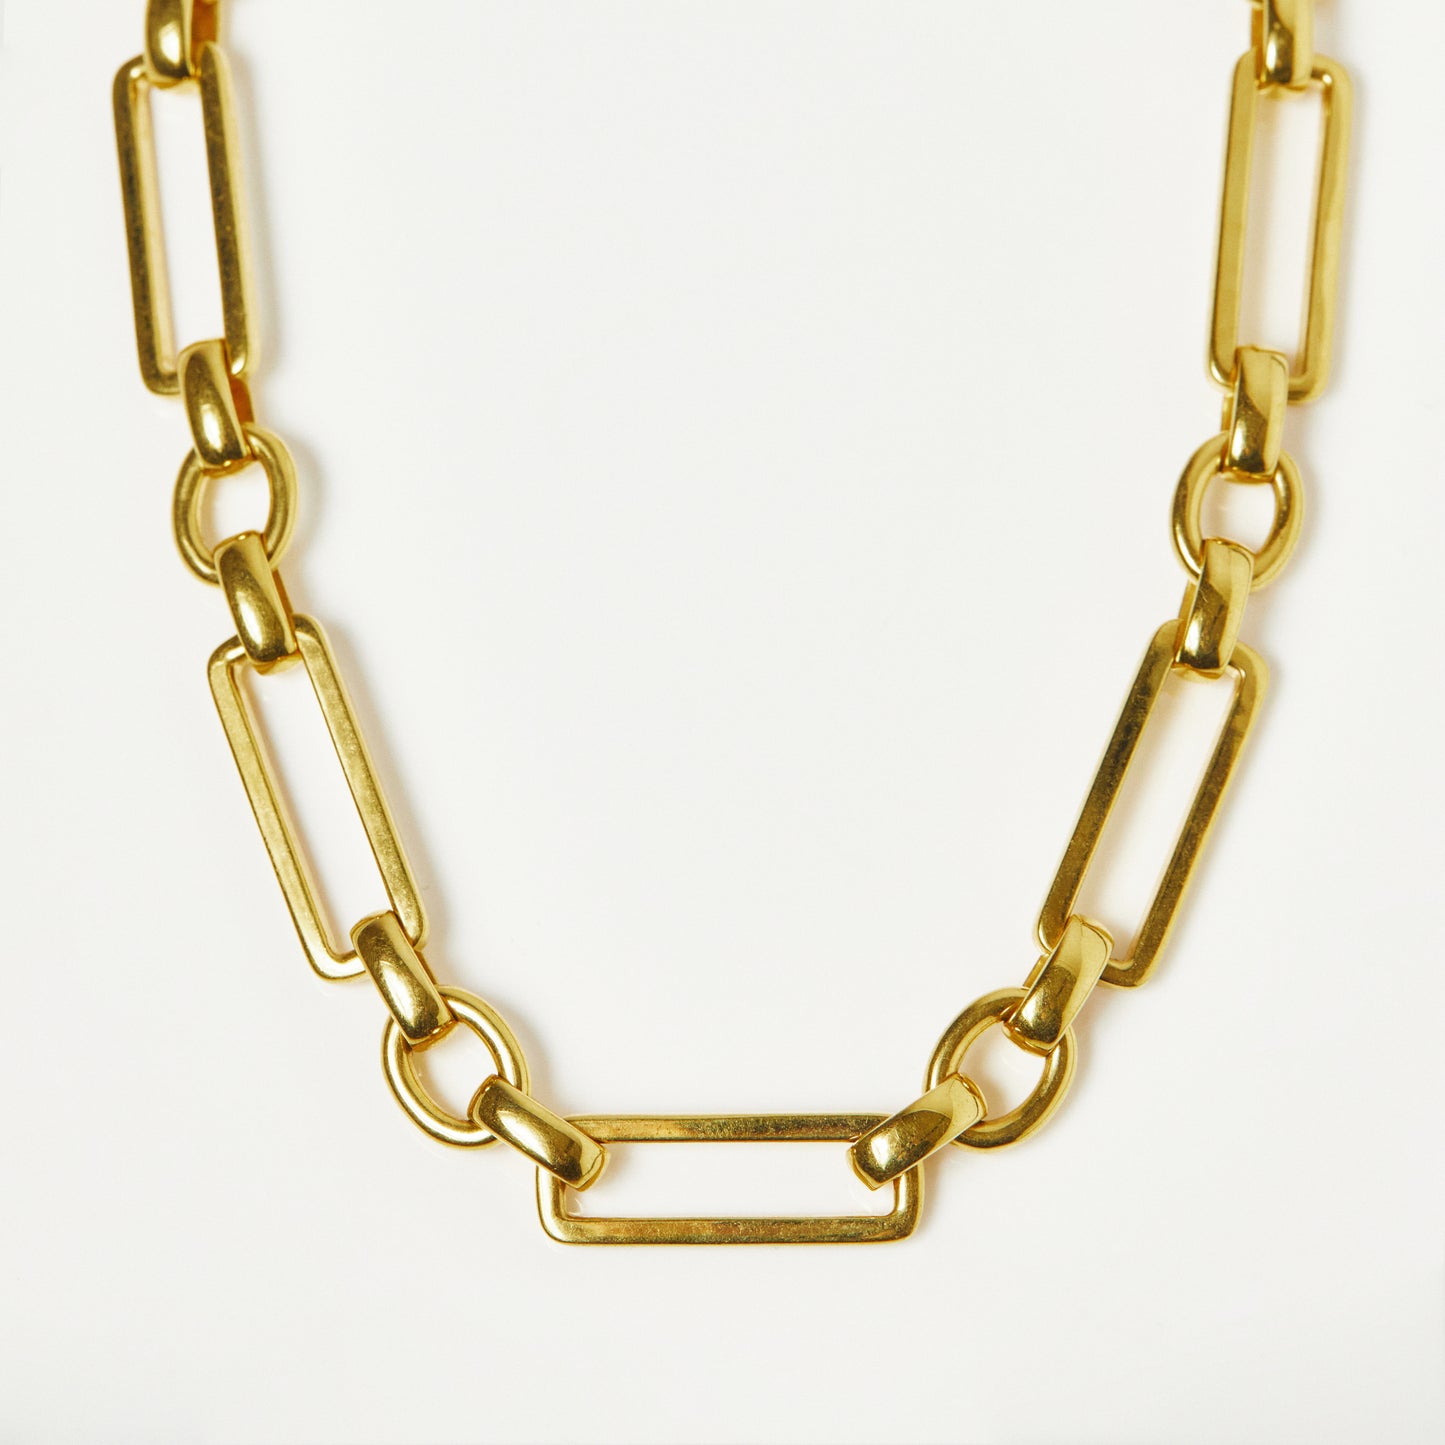 Chunky Link Chain in Gold Plating - Necklace - Carrie Elizabeth